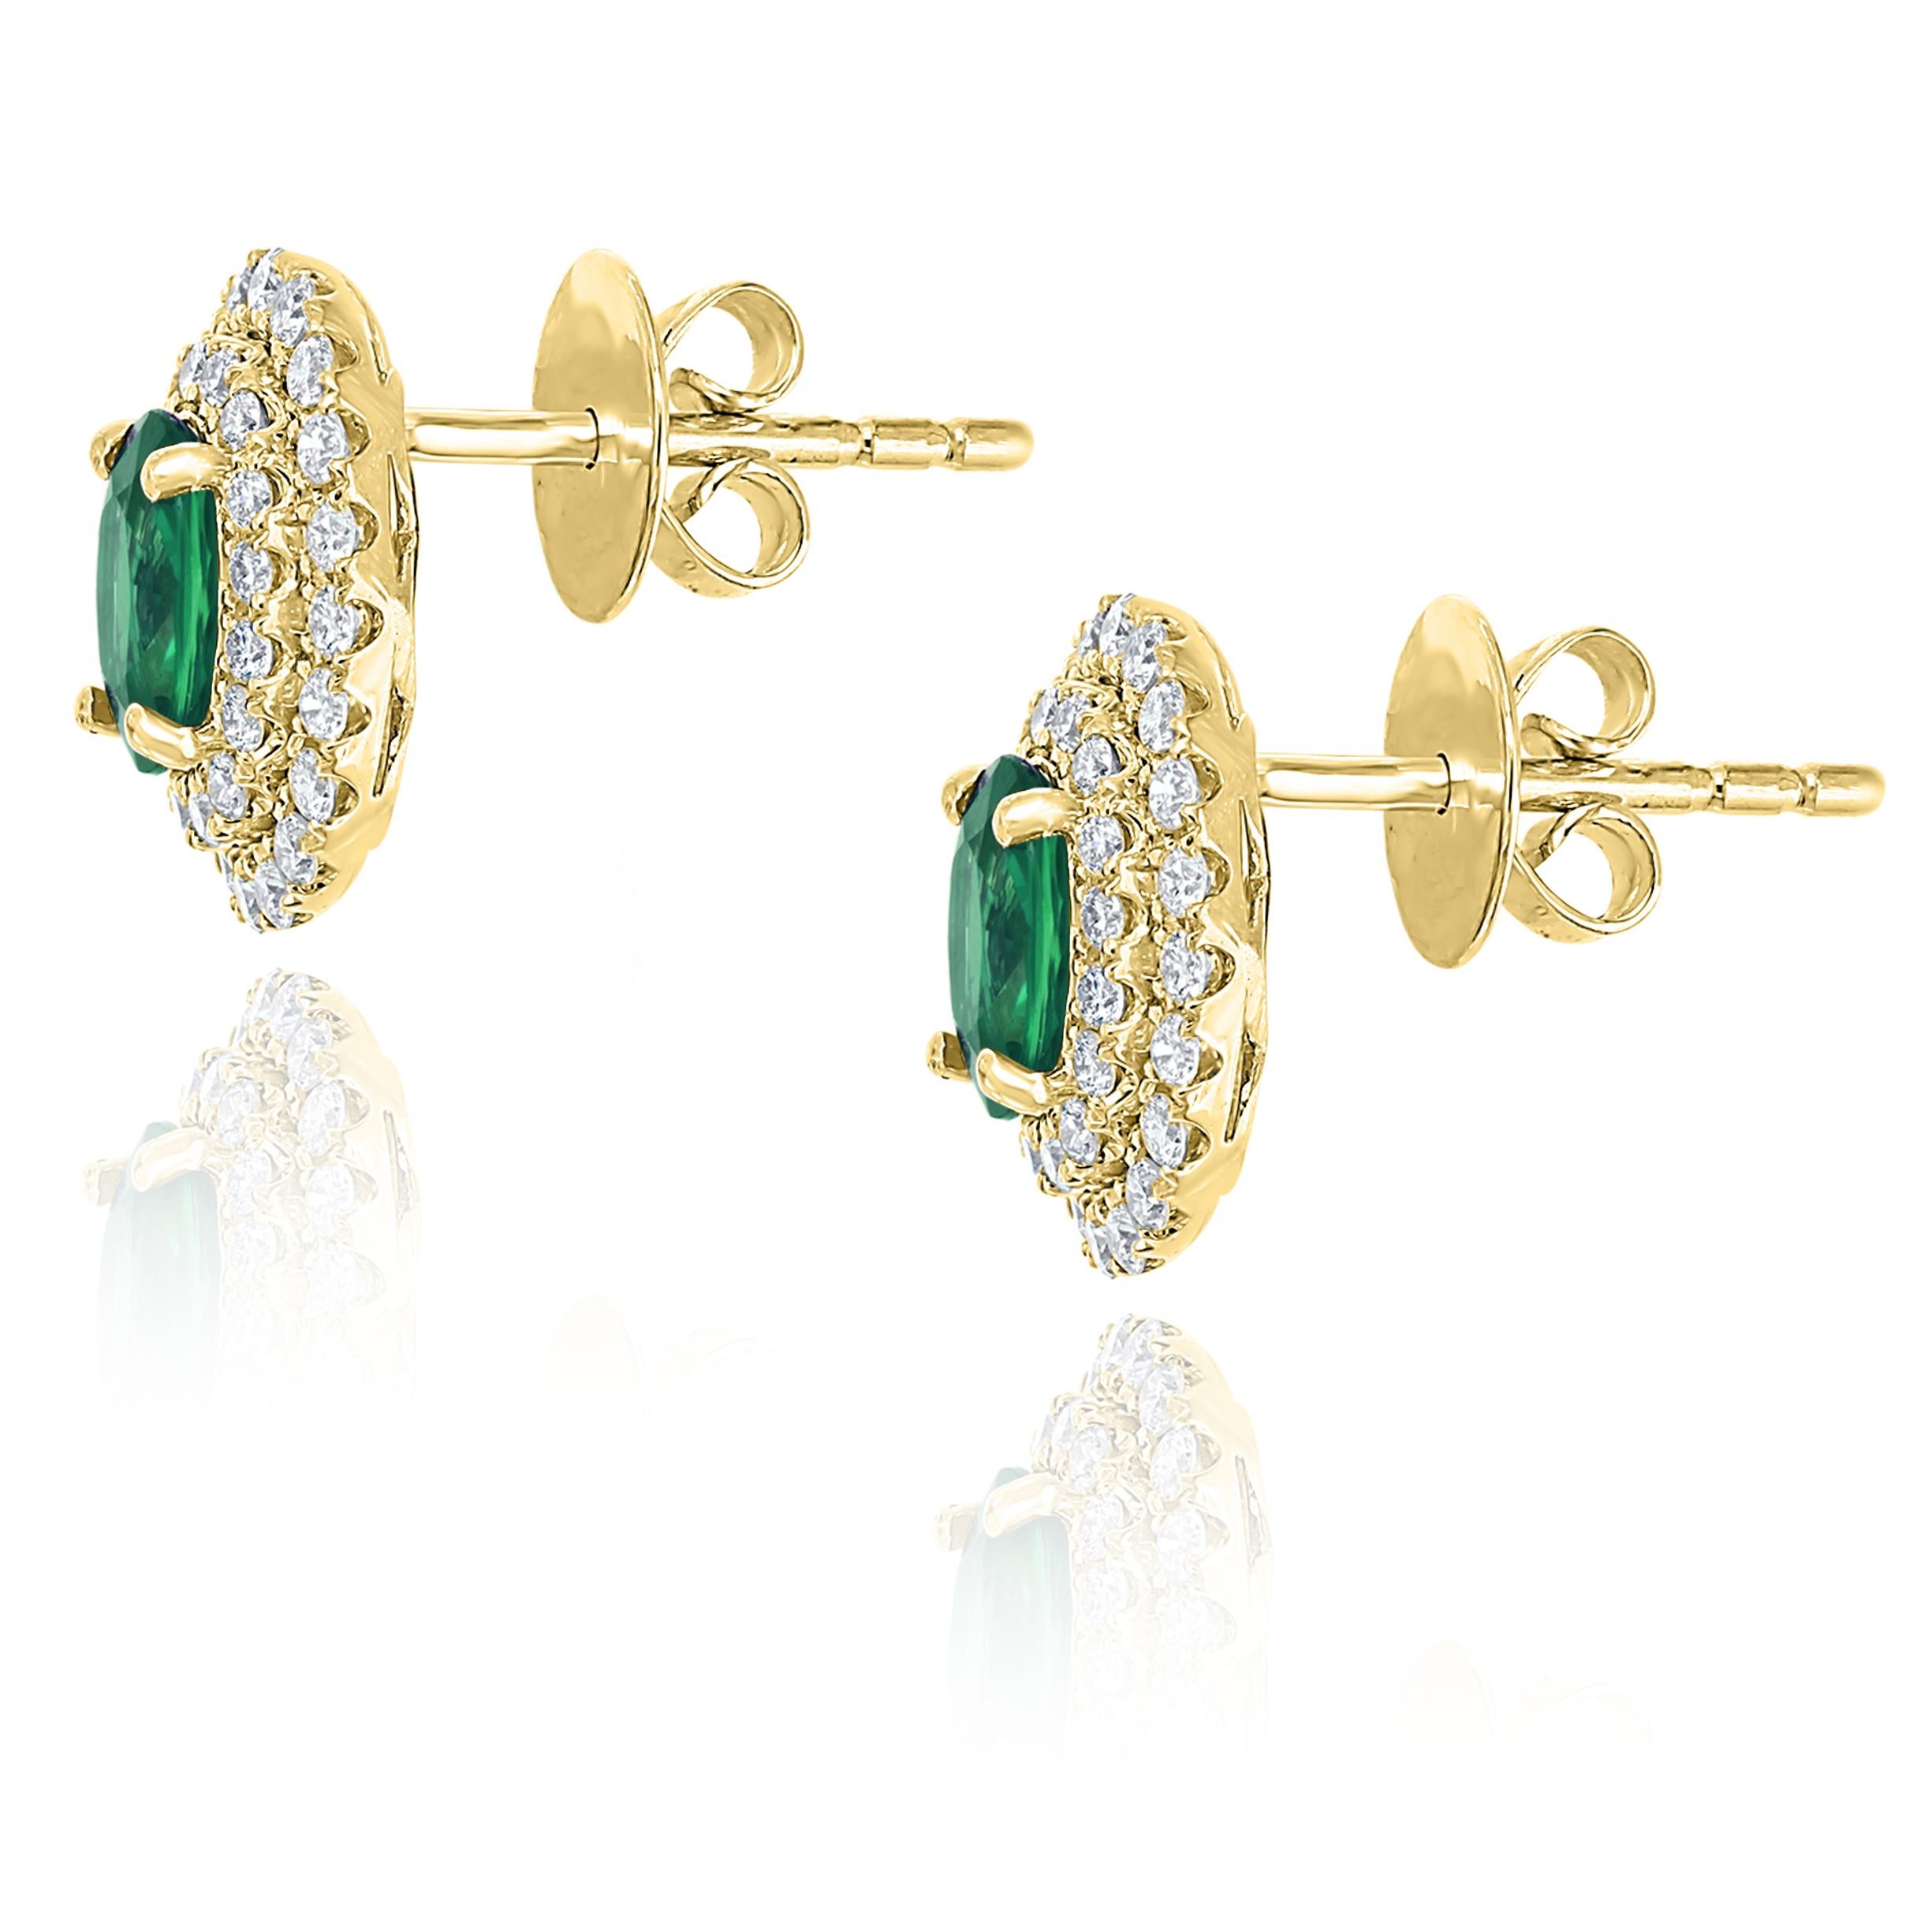 Contemporary 0.89 Carat Oval Cut Emerald and Diamond Stud Earrings in 18K Yellow Gold For Sale